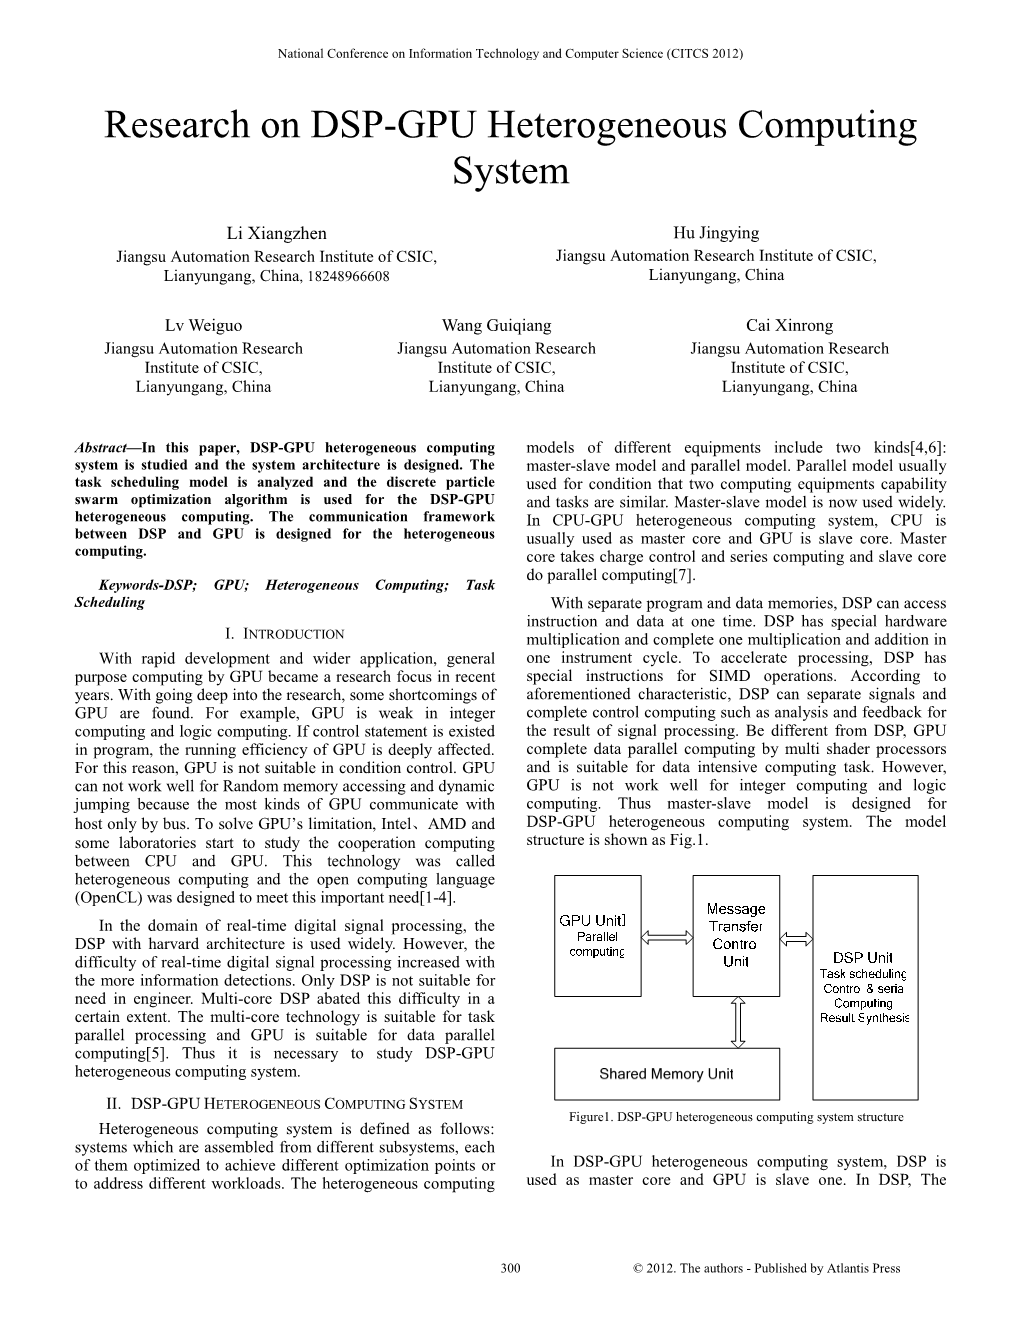 Research on DSP-GPU Heterogeneous Computing System